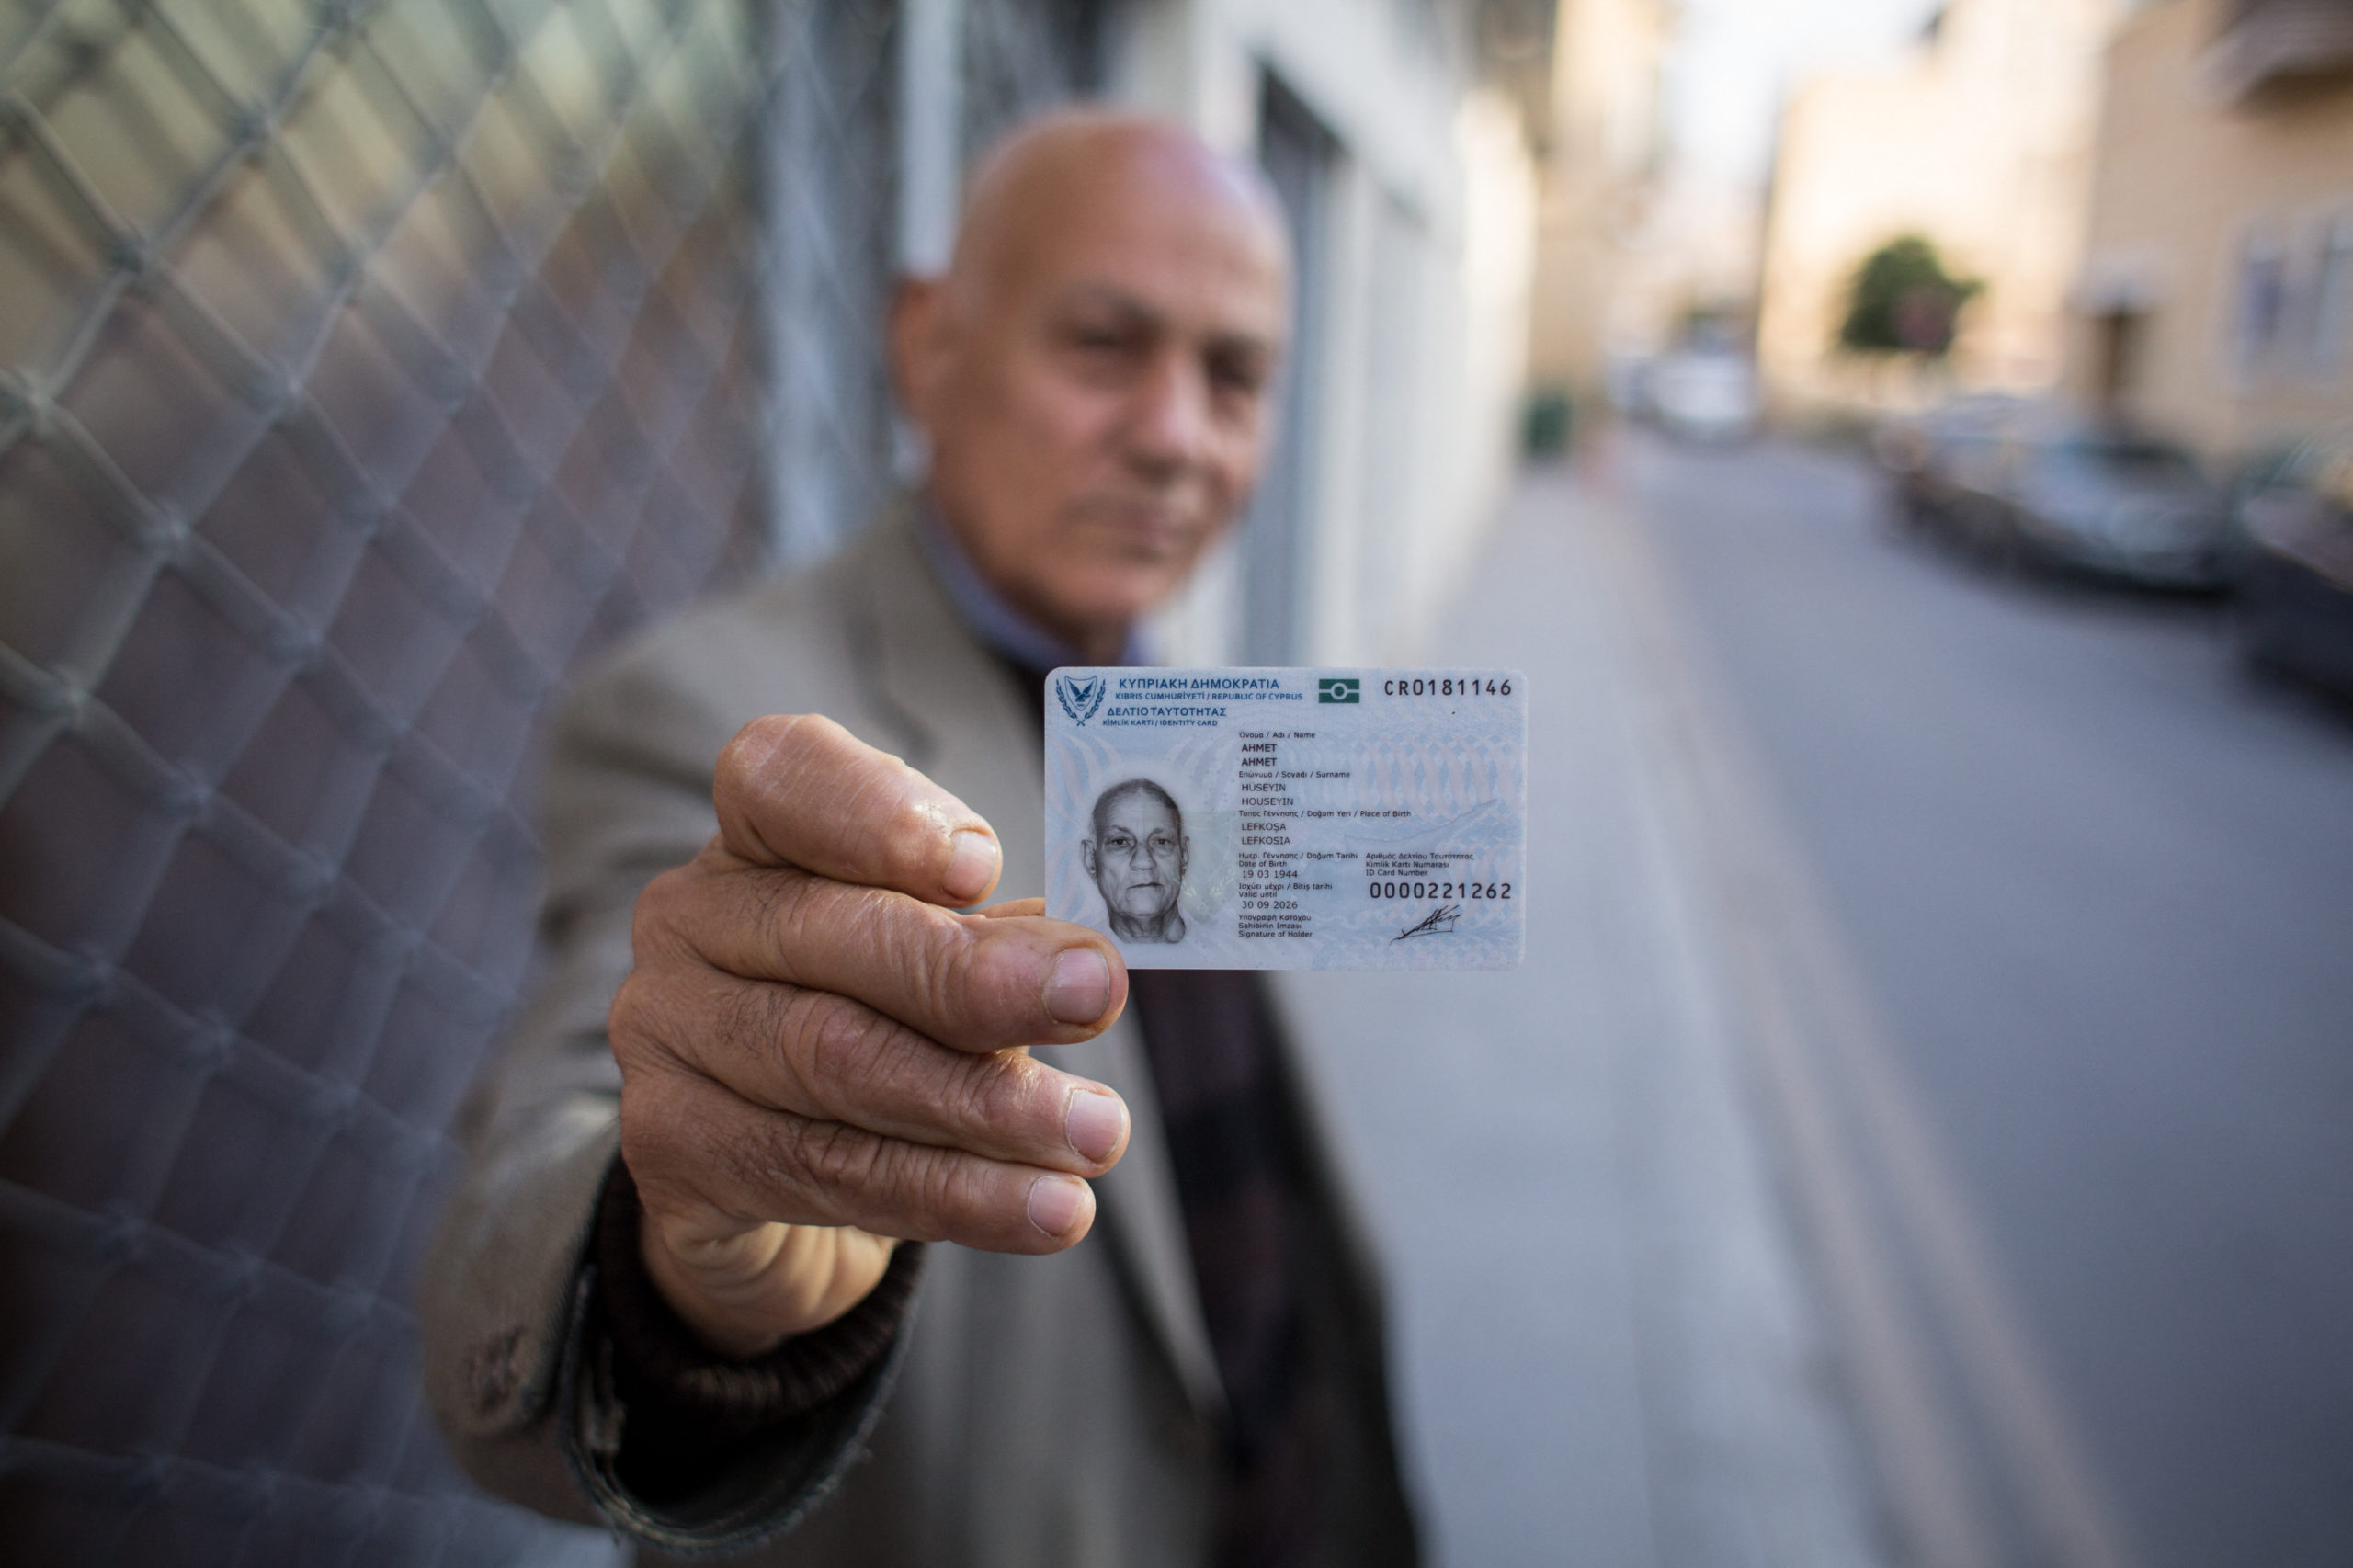 On Ahmet’s ID is written “Turkish Cypriot”. Although he lives in Nicosia, his ID is only valid in Turkey.